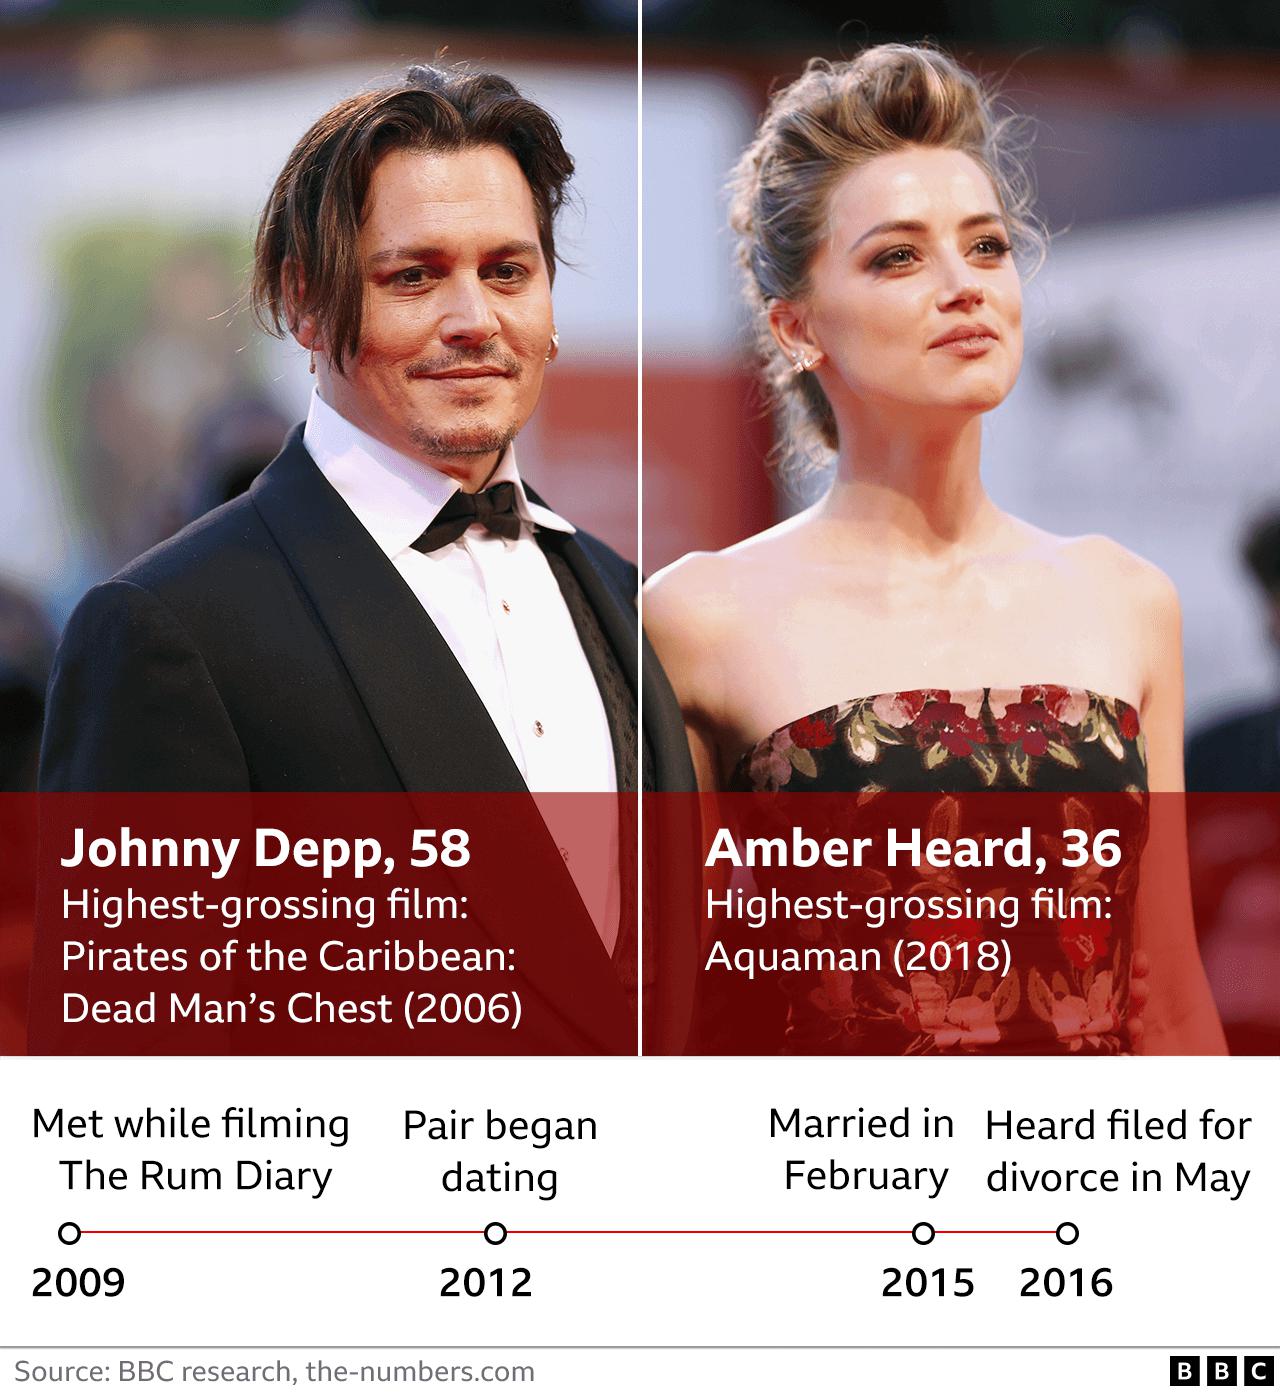 Heard detailed the first time she met Depp, saying it was &quot;unusual and remarkable&quot; 1